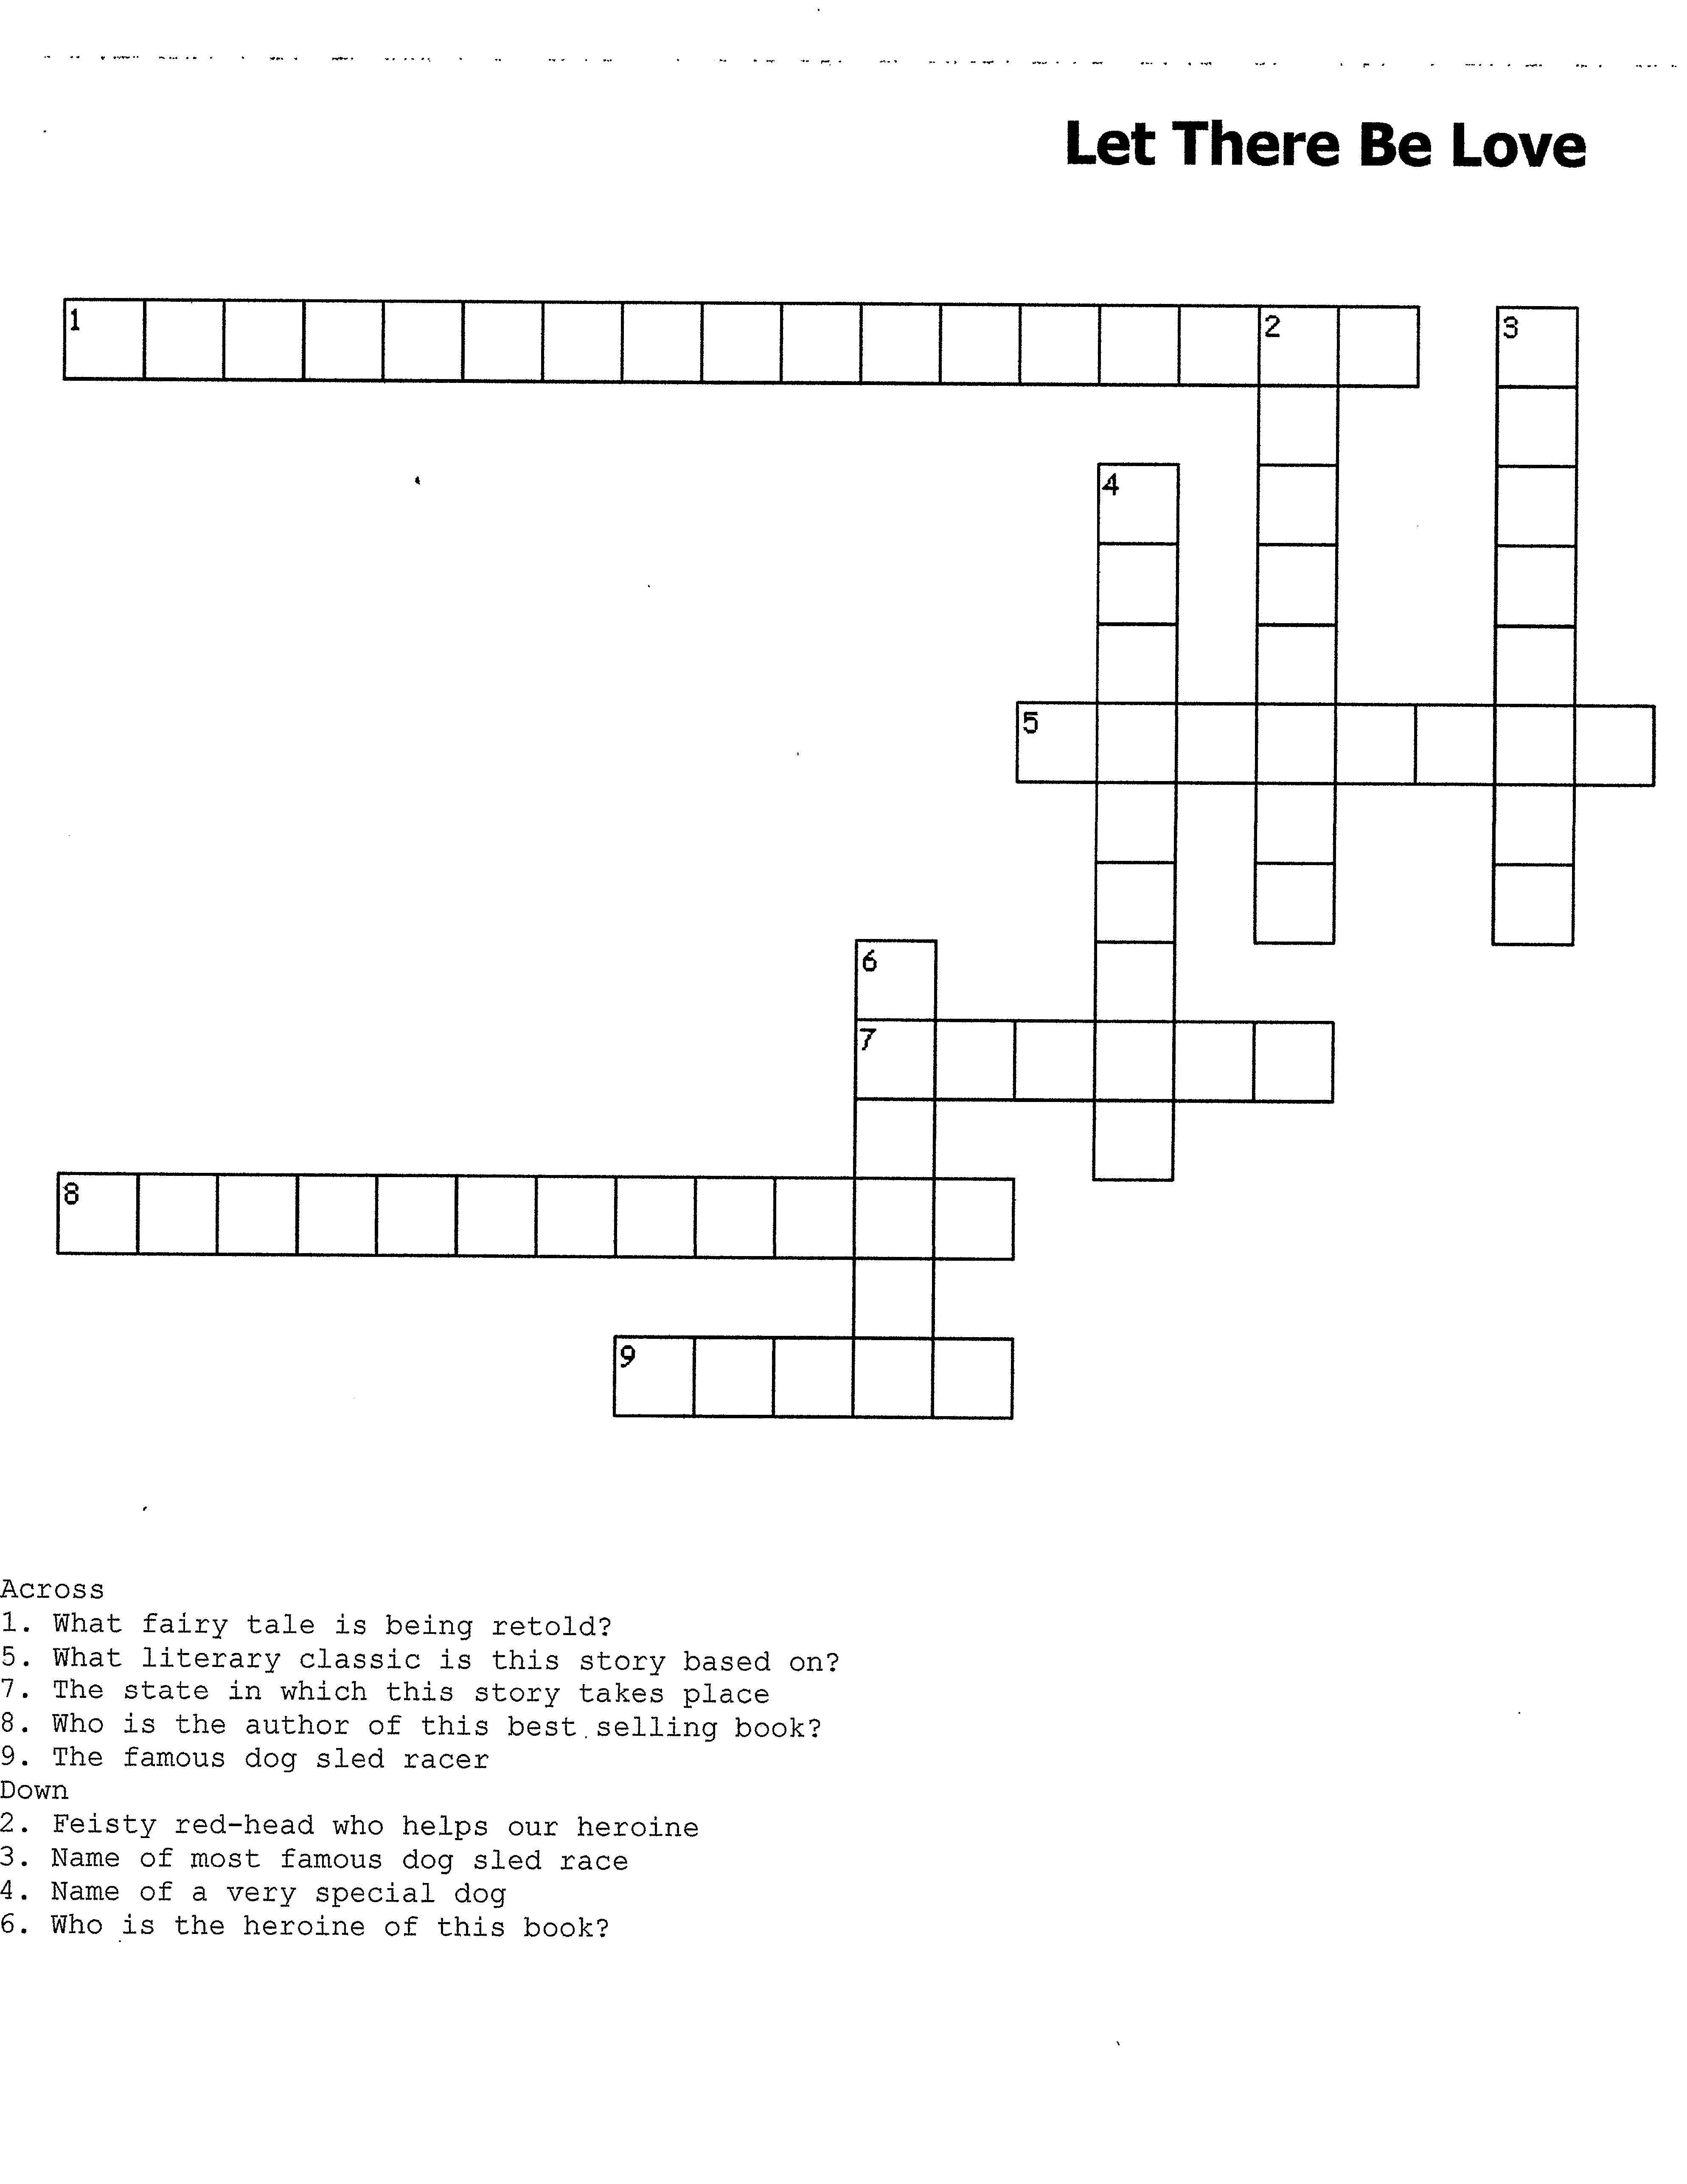 Let There Be Love Crossword Puzzle | The Sled Dog Series | Let There - Printable Crossword Puzzles About Dogs